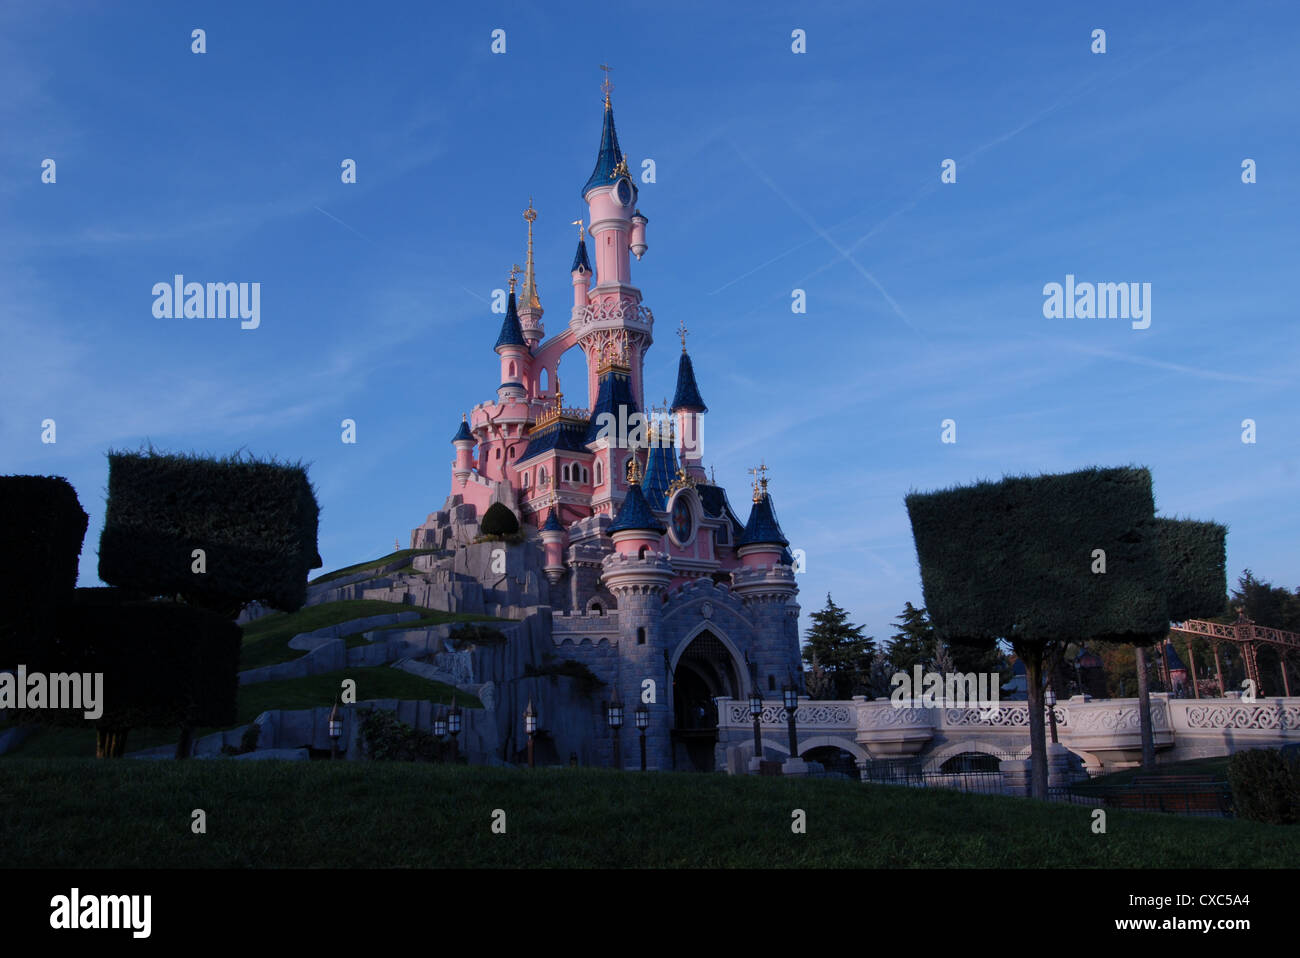 Disneyland Paris Castle With Fountains – Stock Editorial